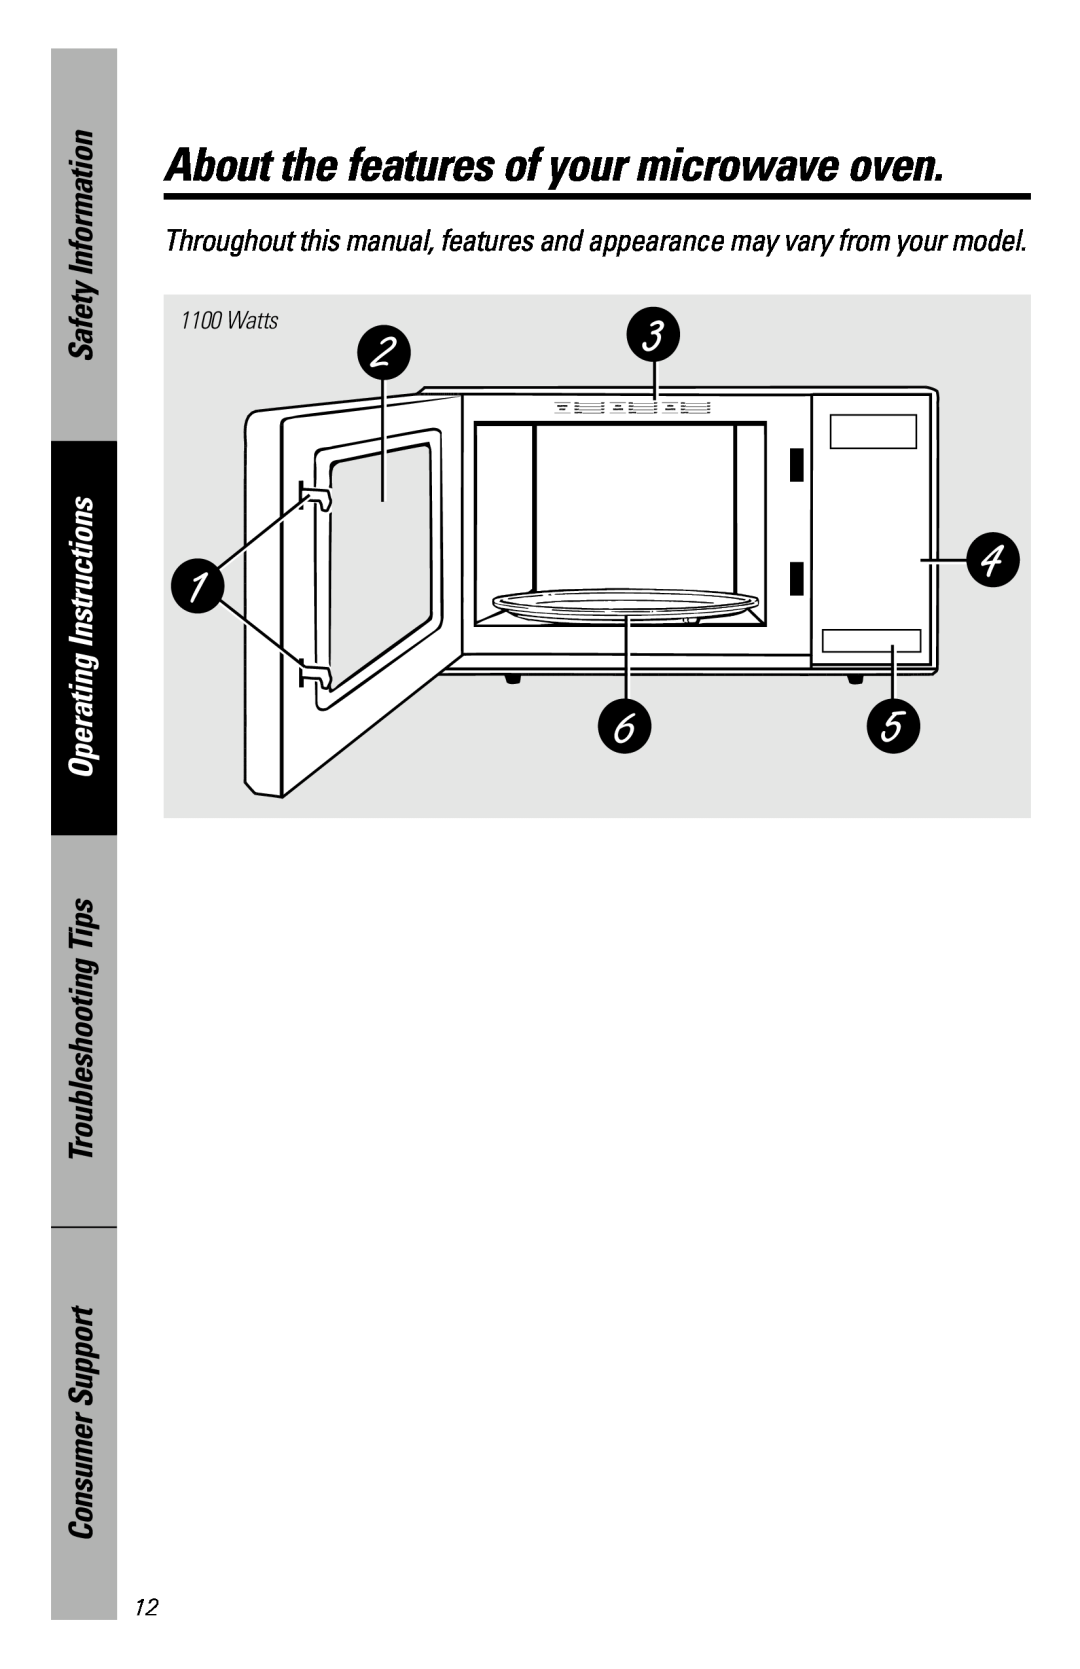 GE JES1246 owner manual About the features of your microwave oven, Safety Information, Operating Instructions 